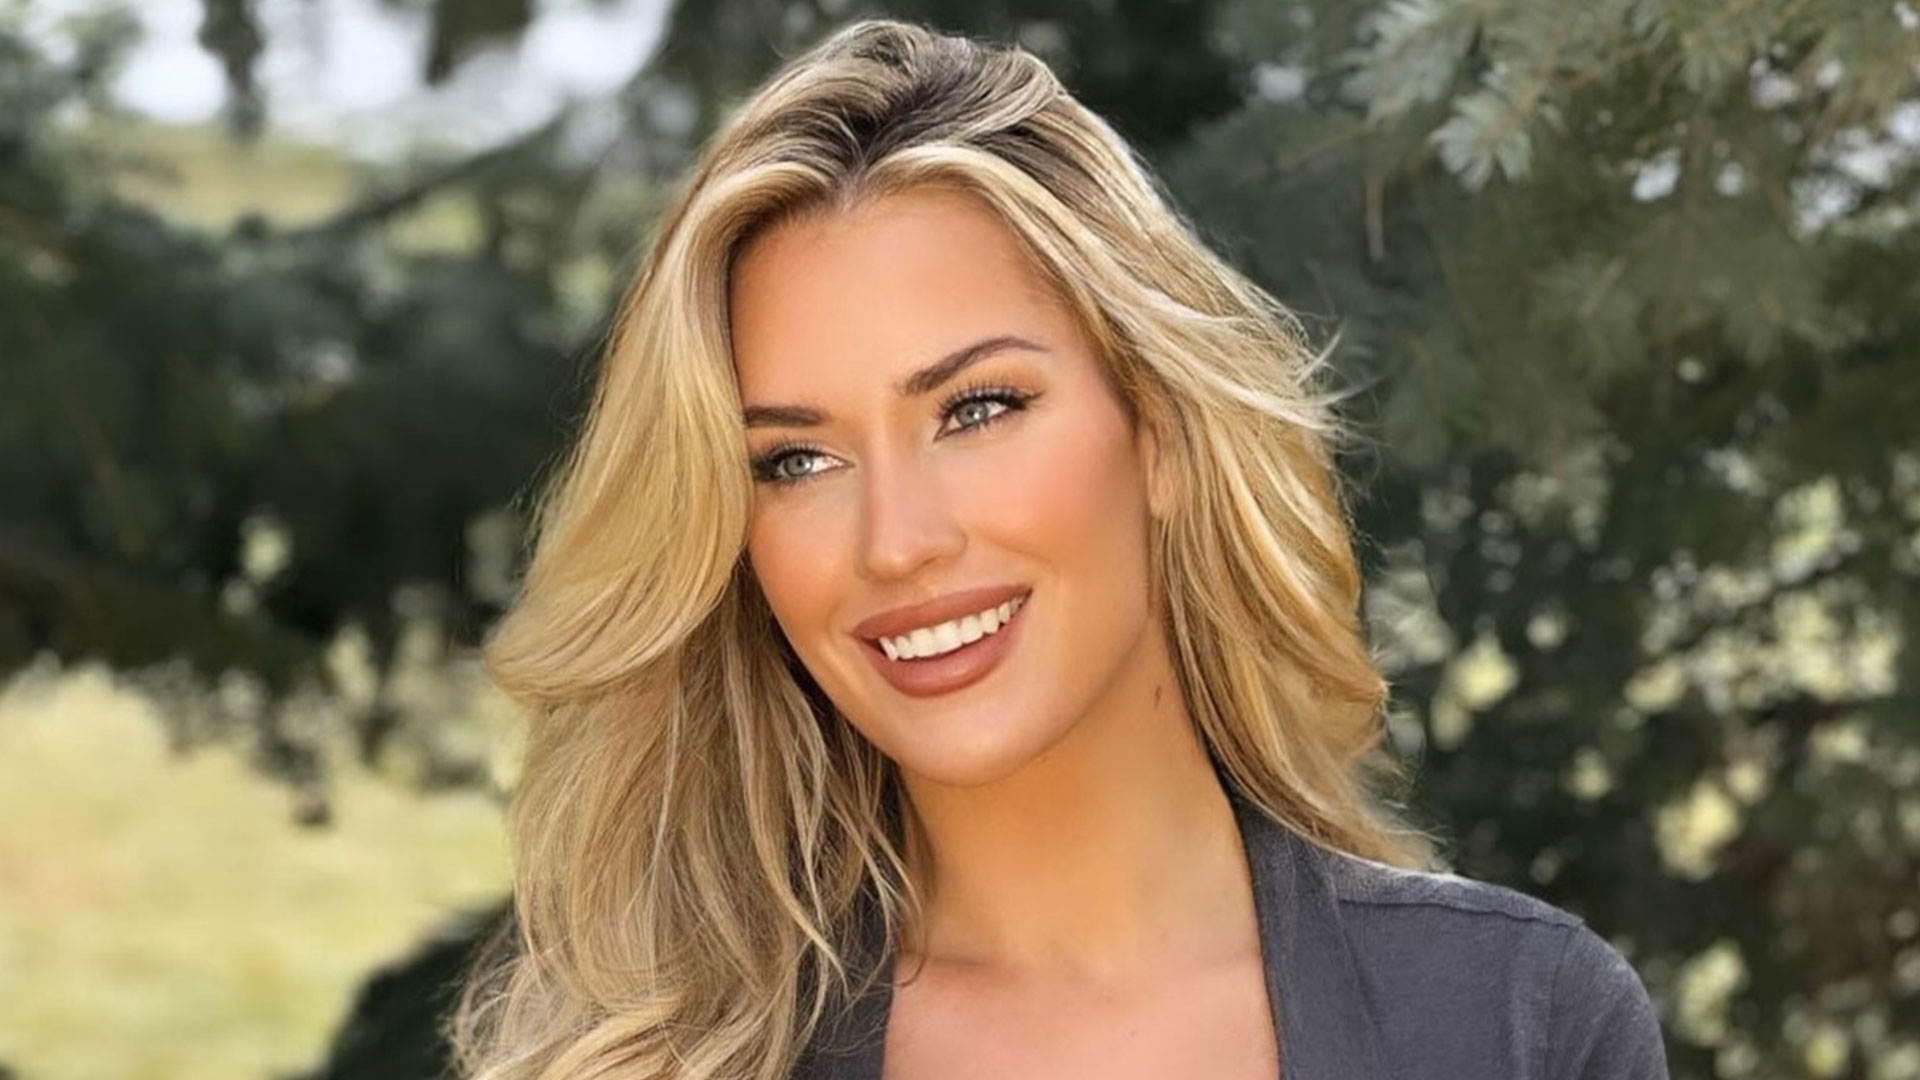 Paige Spiranac puts on busty display in eye-popping crop-top and mini skirt leaving fans in awe